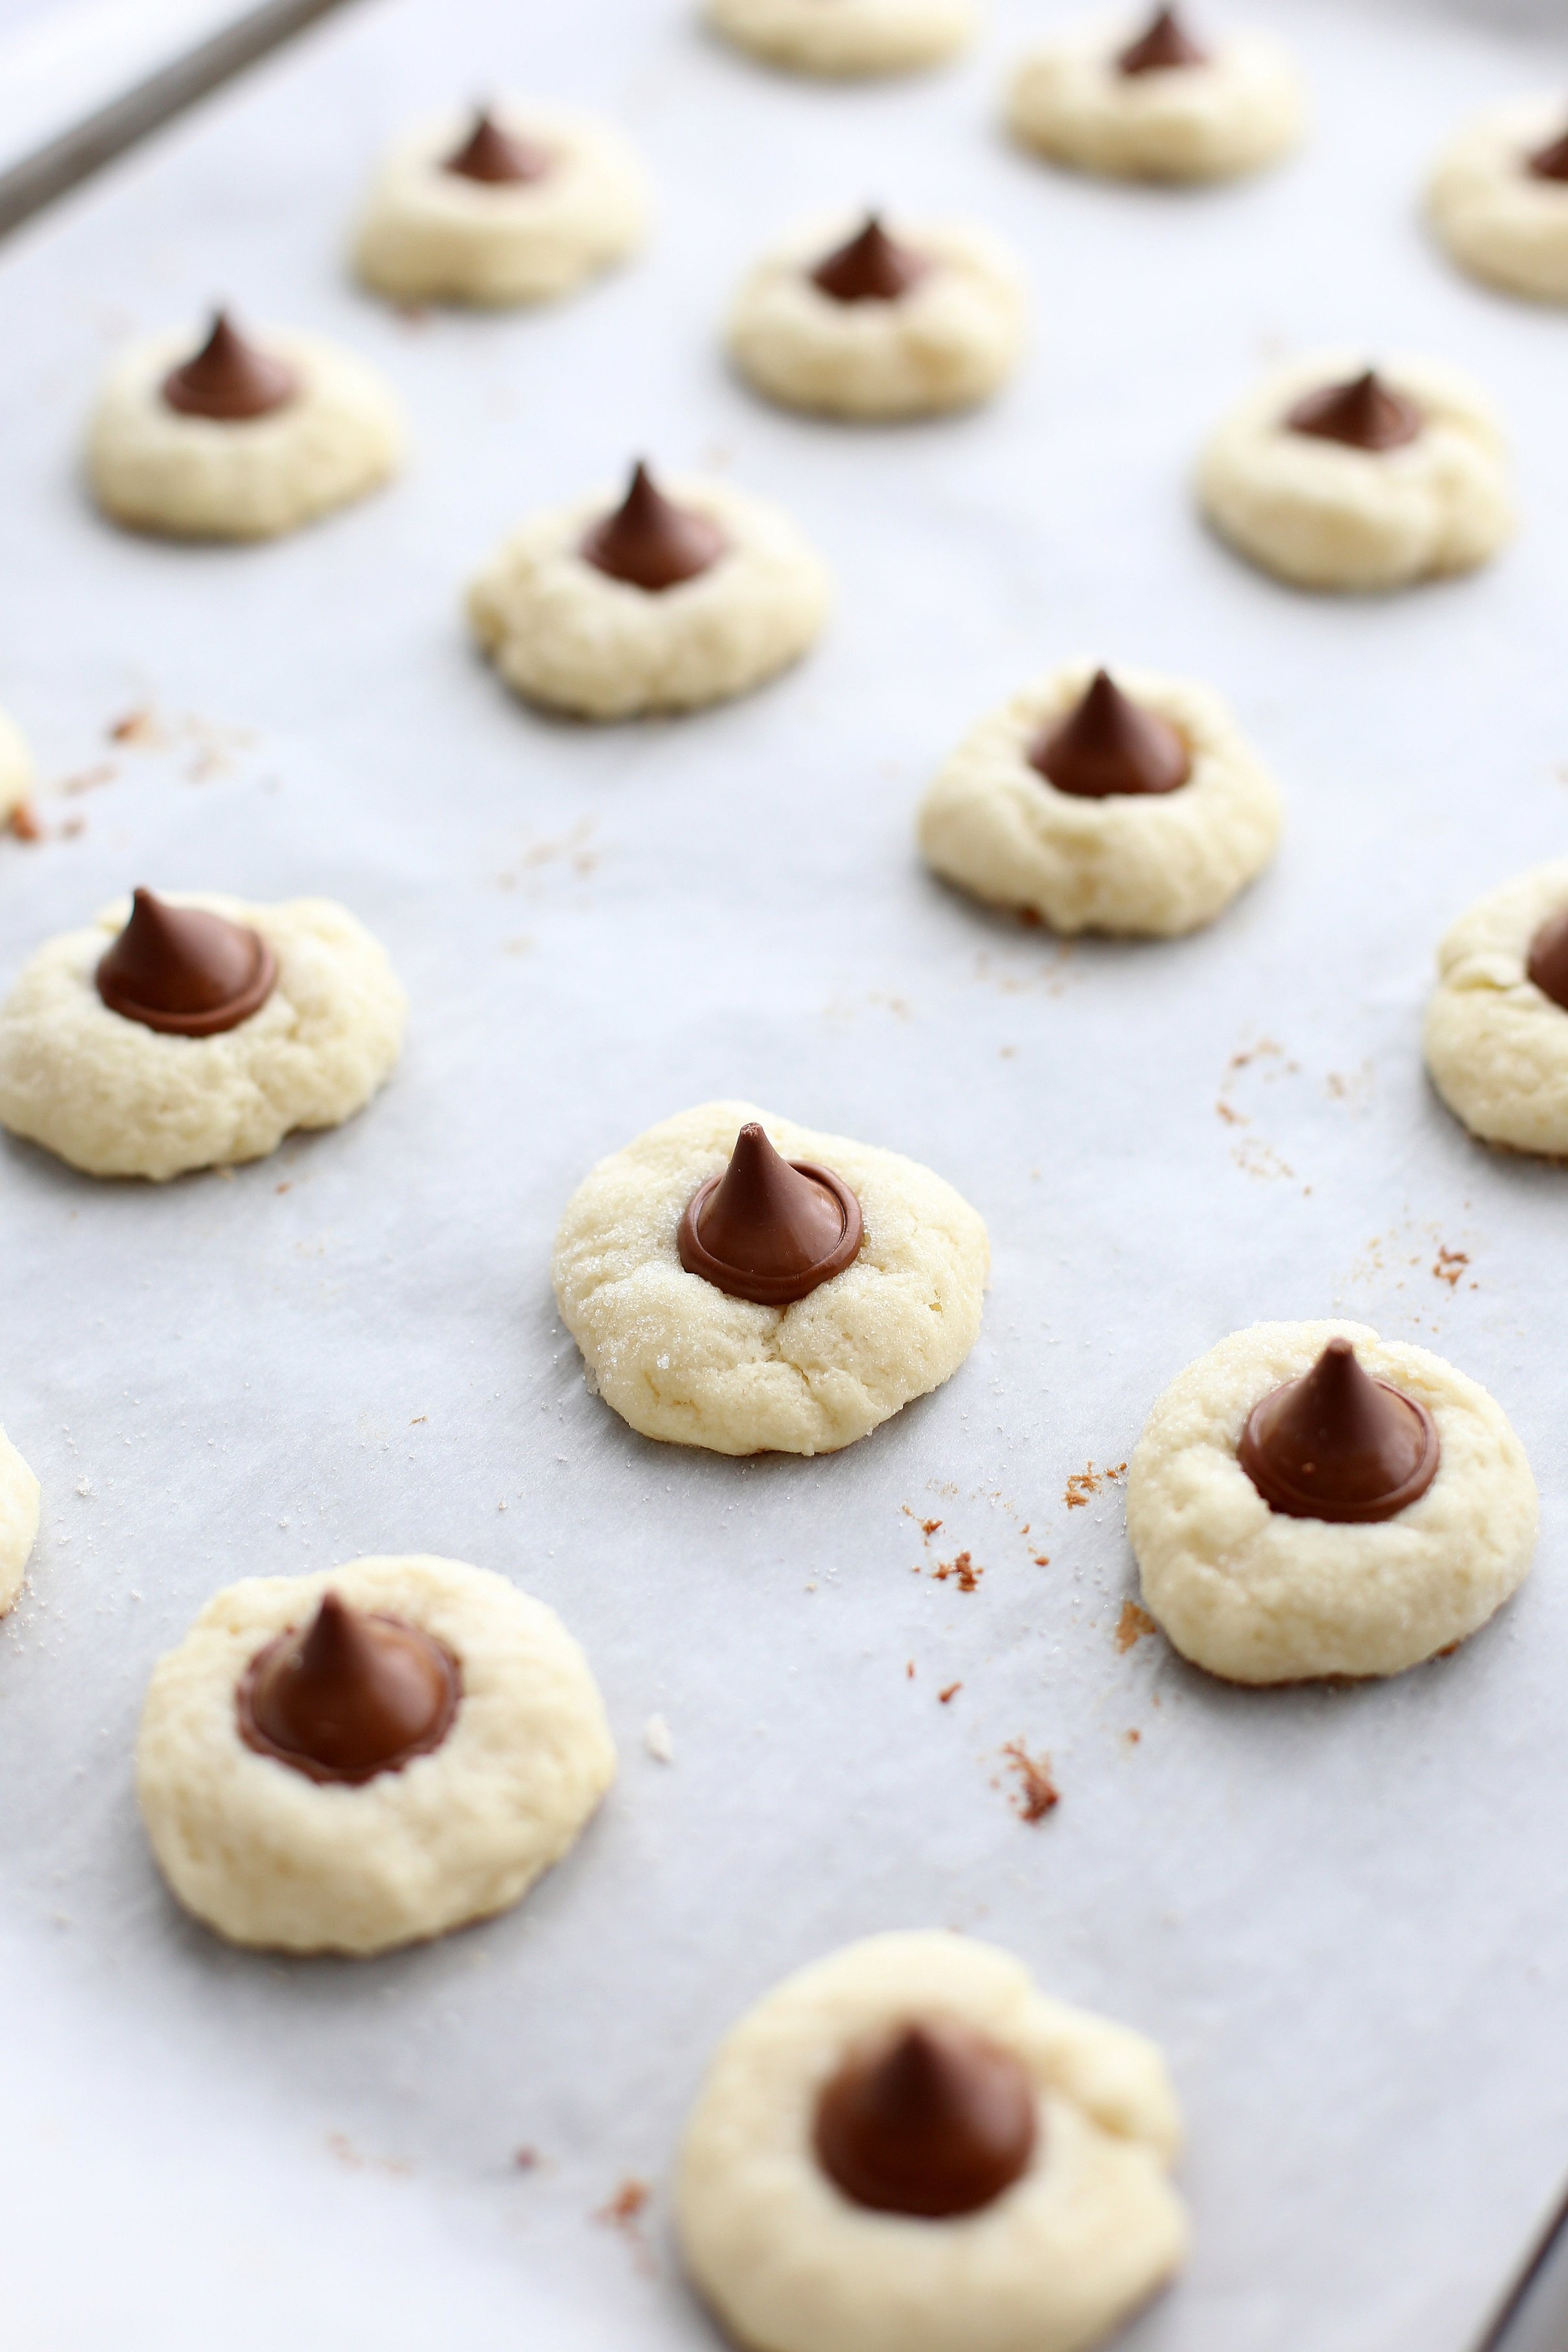 Baked Cream Cheese Kiss Cookies lined up on a parchment paper-lined baking sheet.